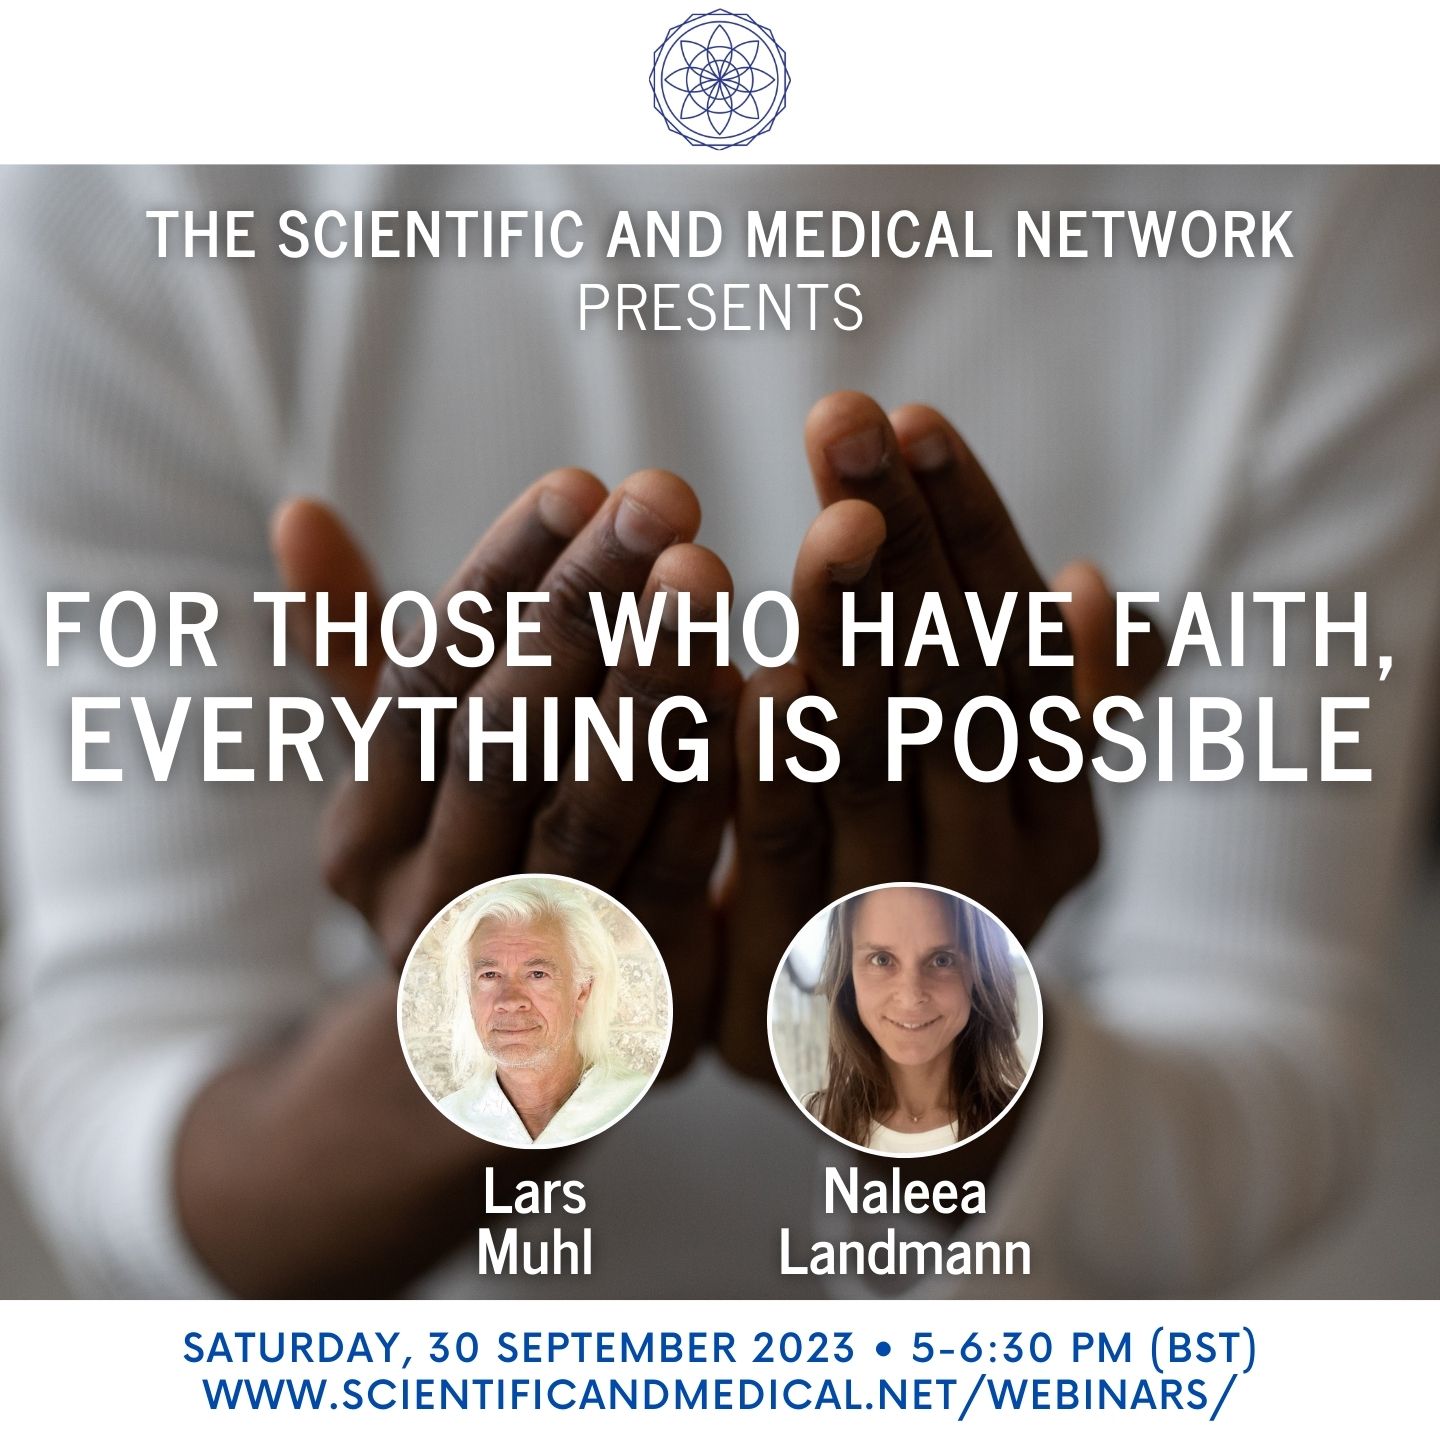 Lars Muhl and Naleea Landmann For Those Who Have Faith Everything is Possible